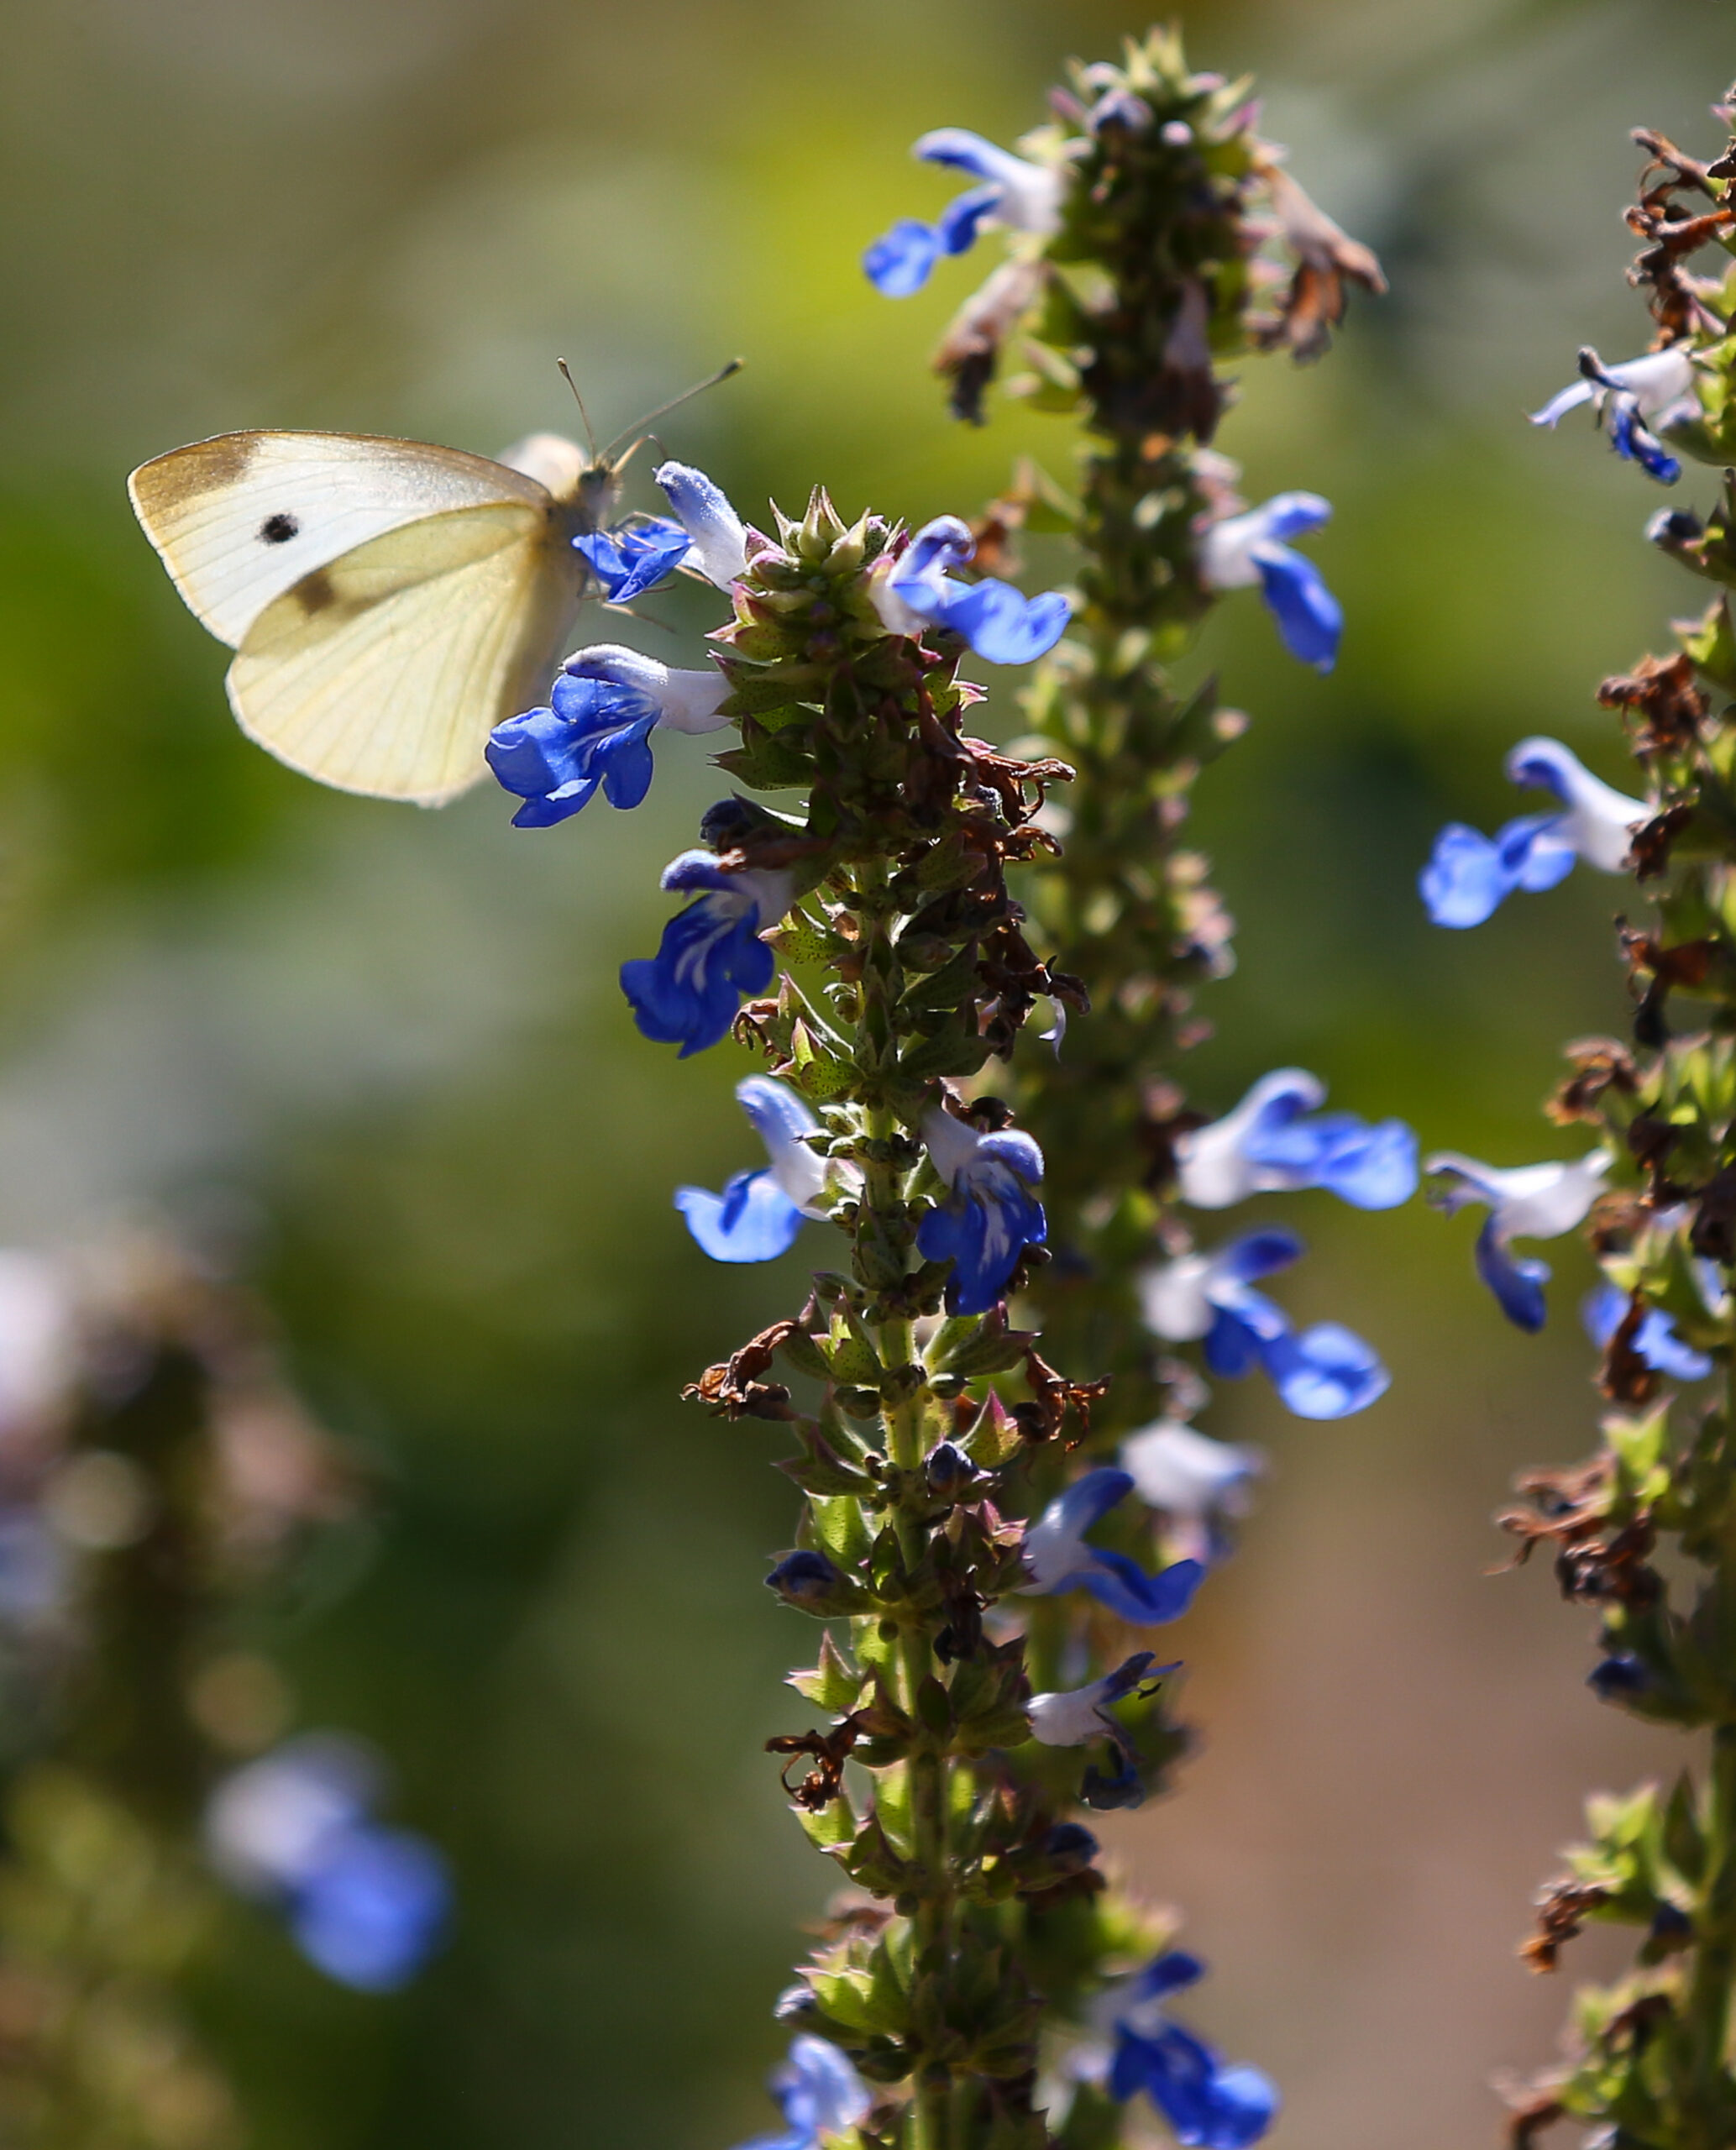 Pollinators, such as butterflies, are an important ally in helping your garden thrive, at Sonoma Garden Park in Sonoma on Monday, September 20, 2021. (Christopher Chung/ The Press Democrat)